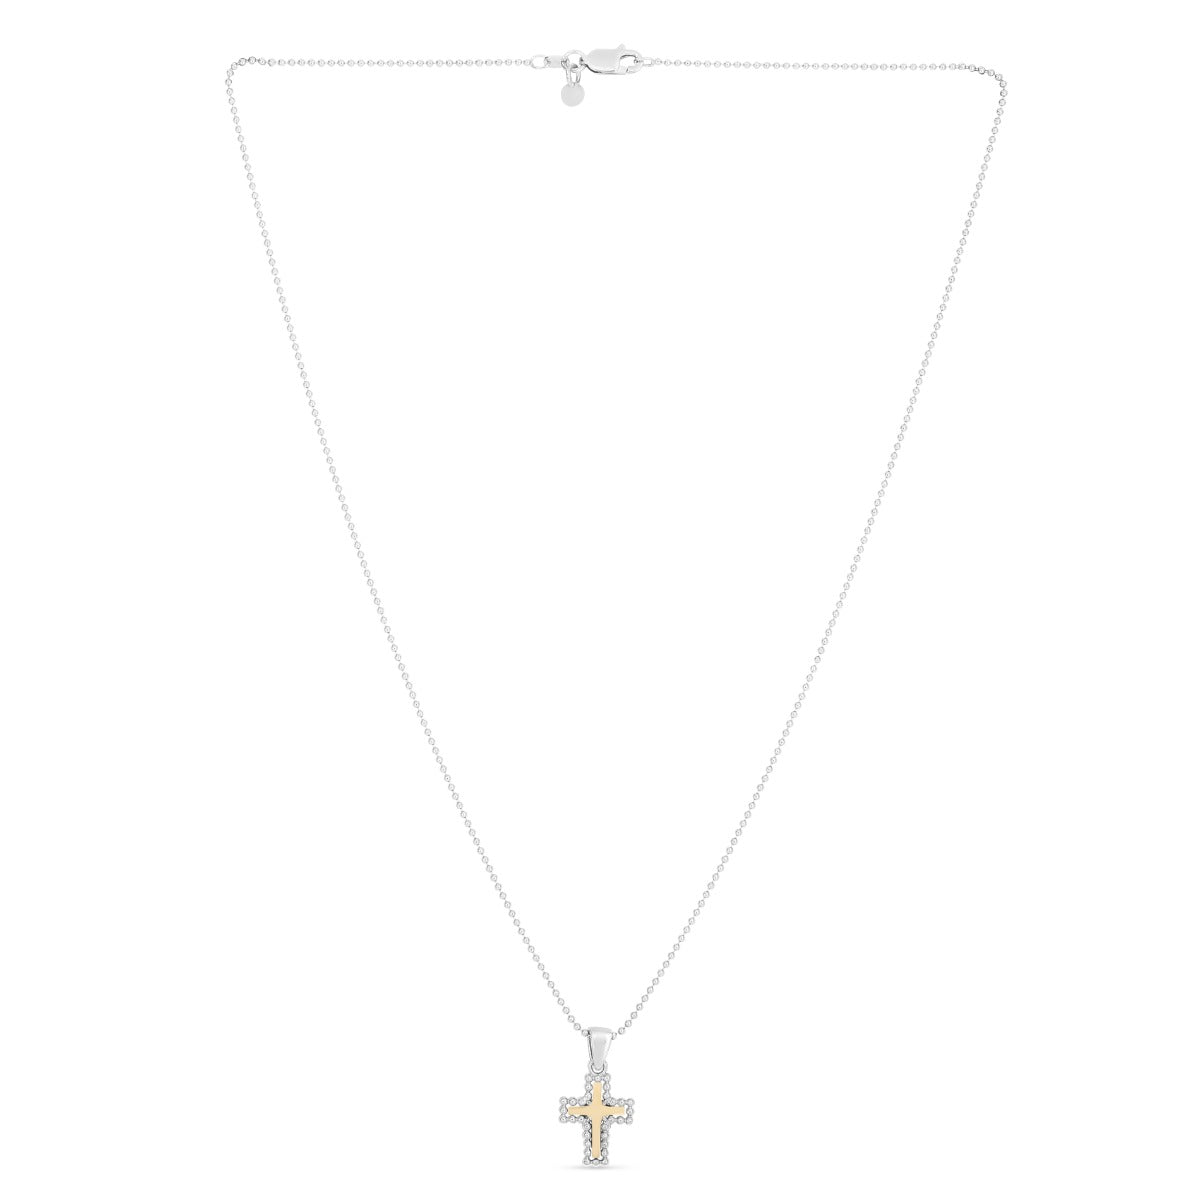 18K Gold & Sterling Silver Gold Popcorn and Polish Cross Charm Pendant NecklaceClasp